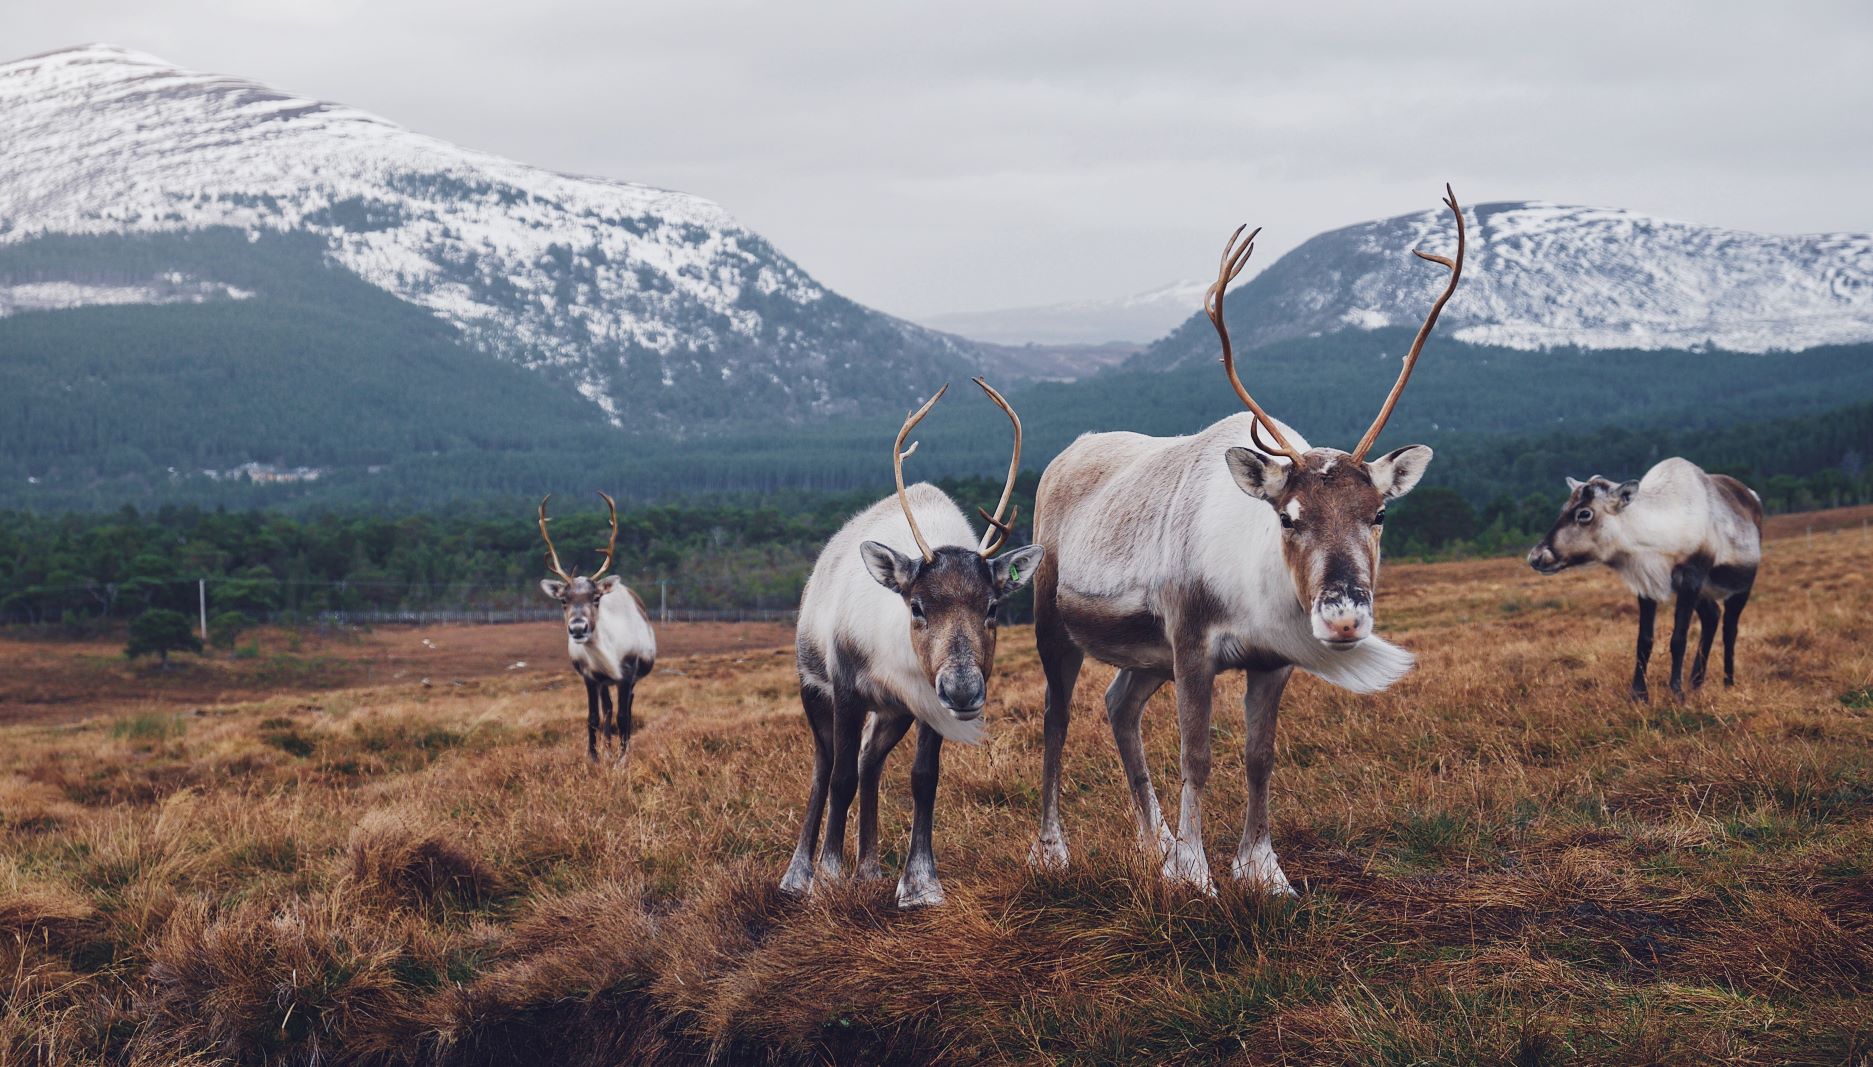 Several reindeer standing on an open hillside with snow-capped mountains in the background